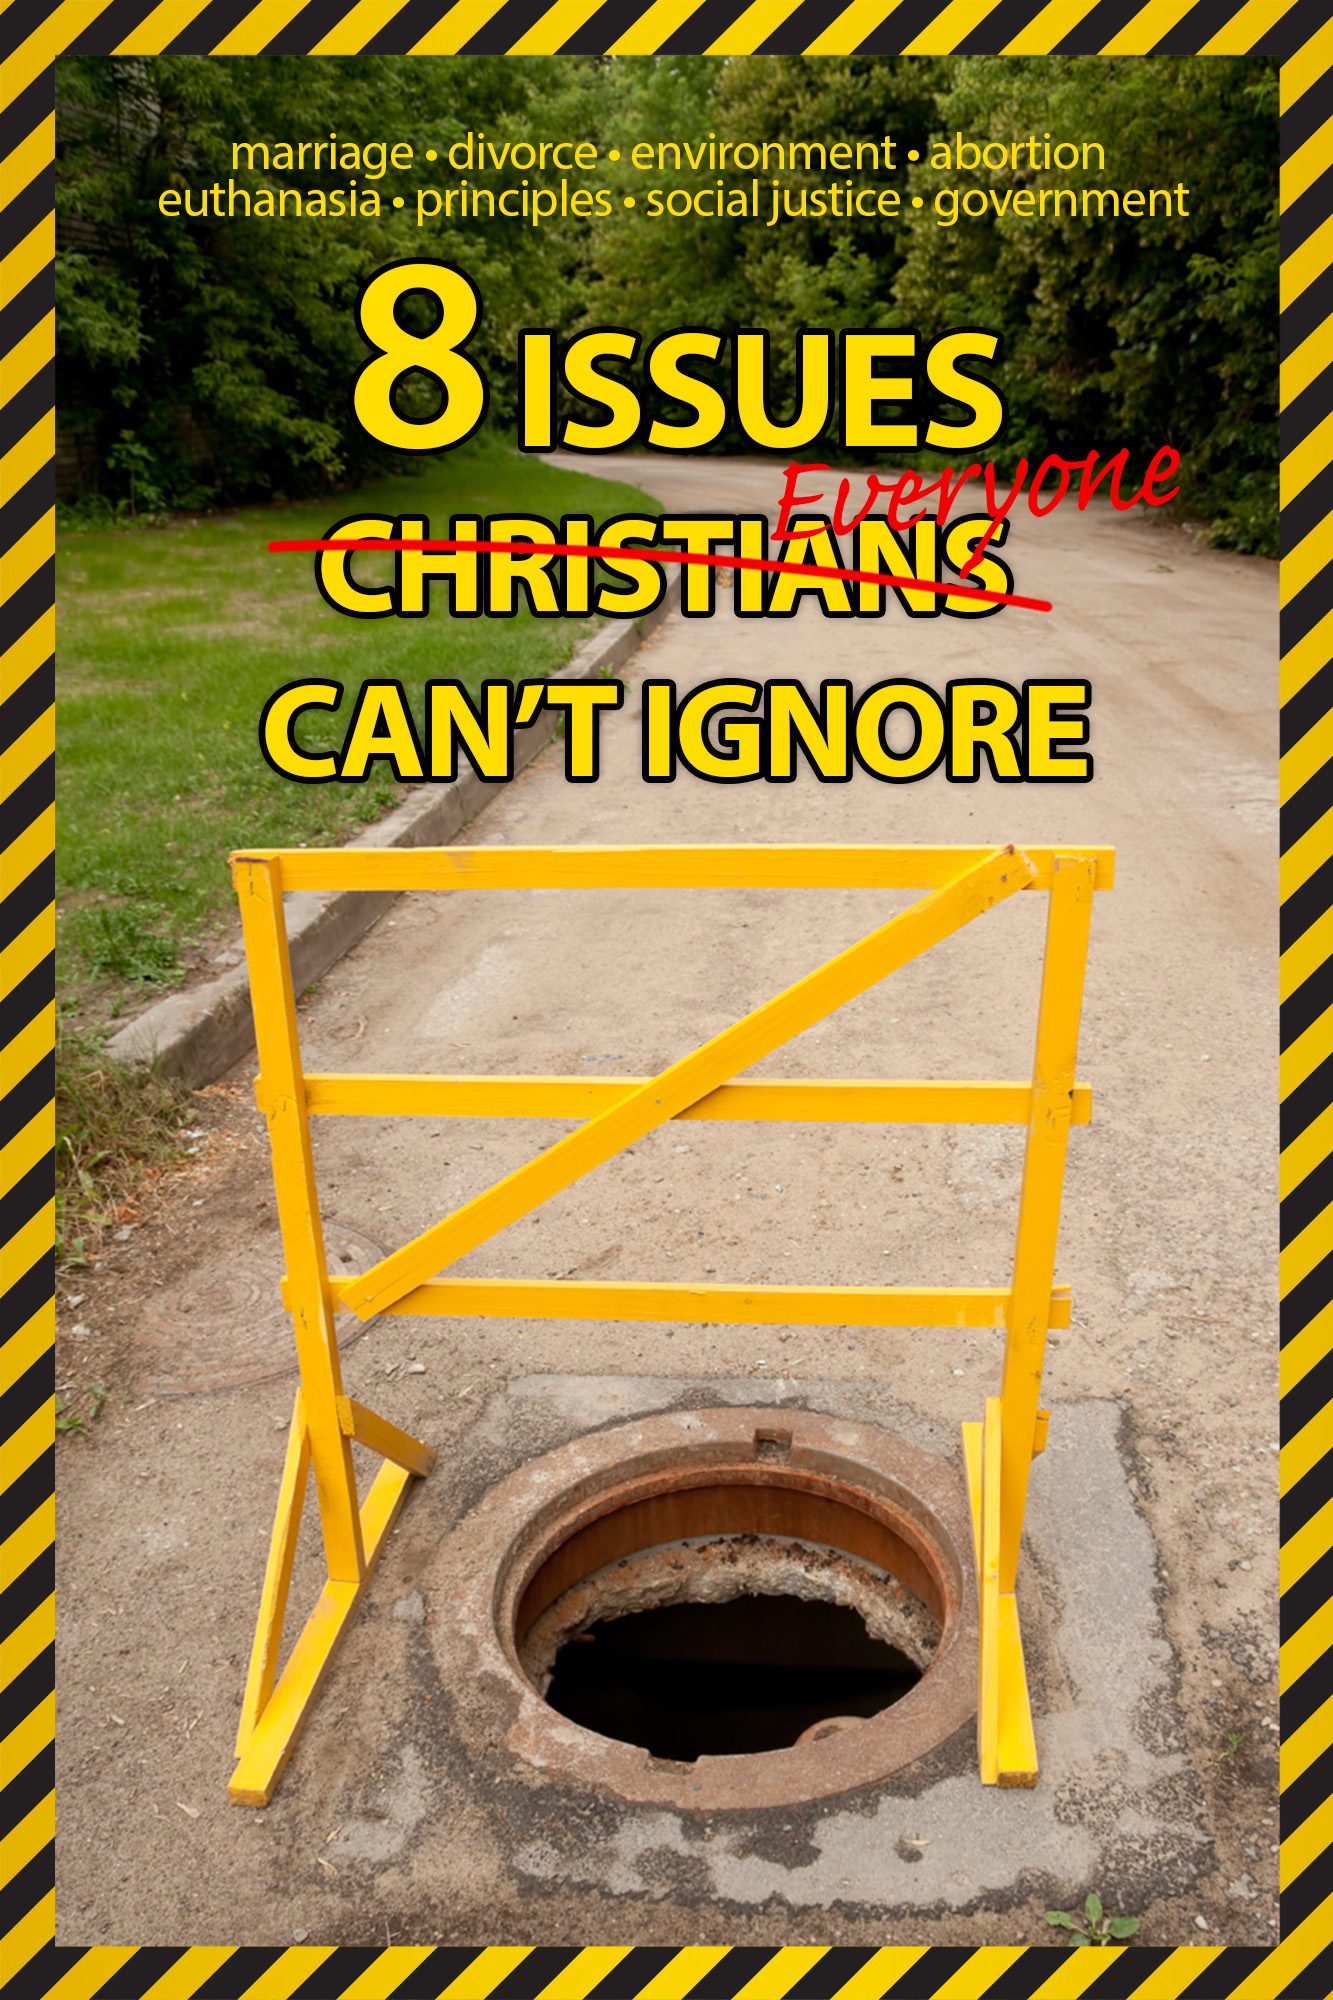 Image of barricade over manhole with text '8 issues everyone can't ignore'